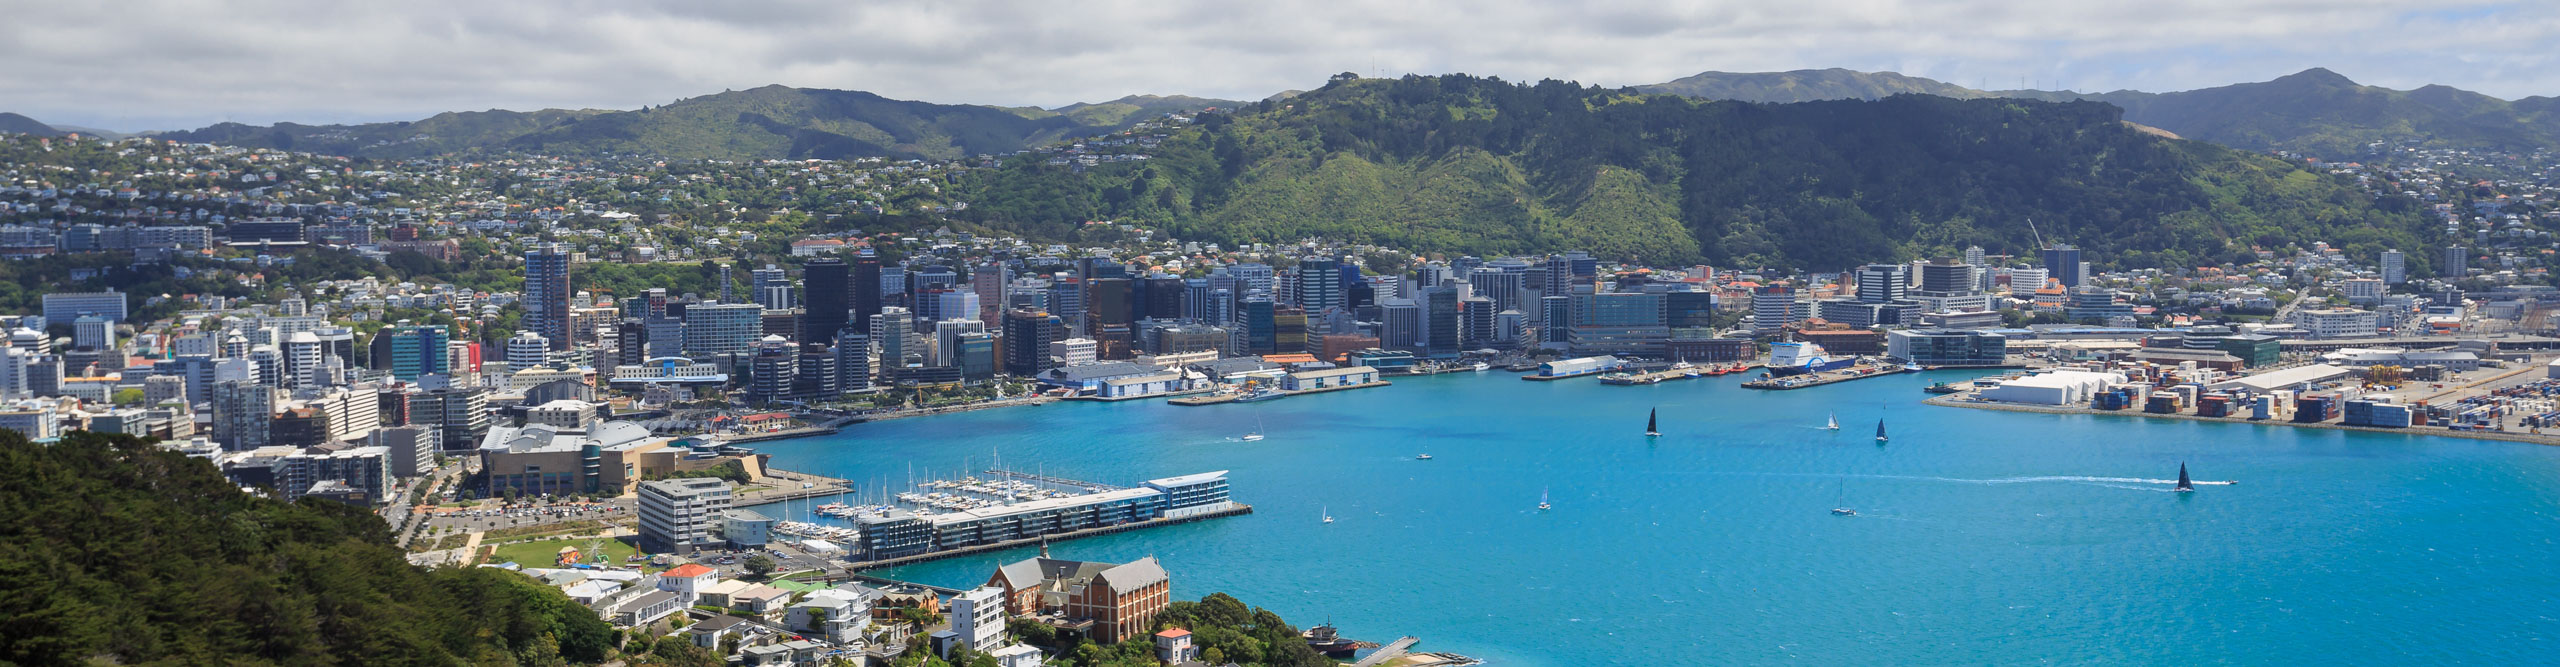 Wellington City harbour and downtown on a cloudy day, with the water a bright turquoise blue